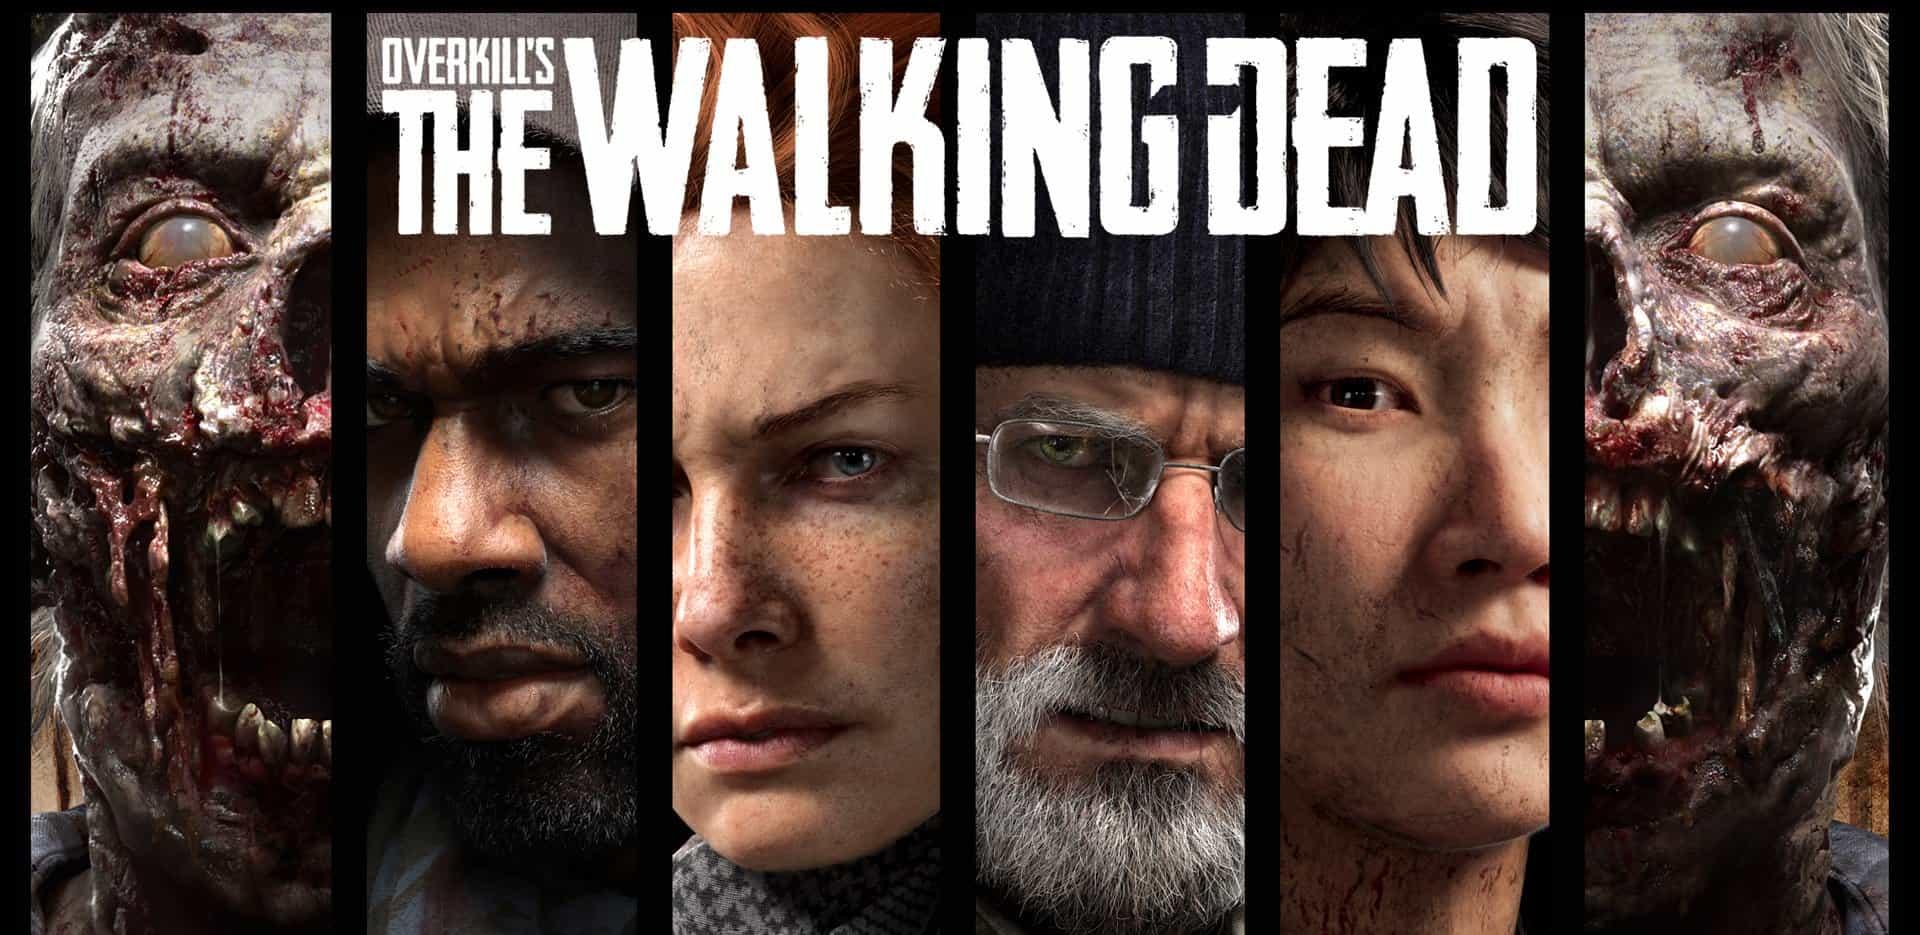 download overkill the walking dead ps5 for free